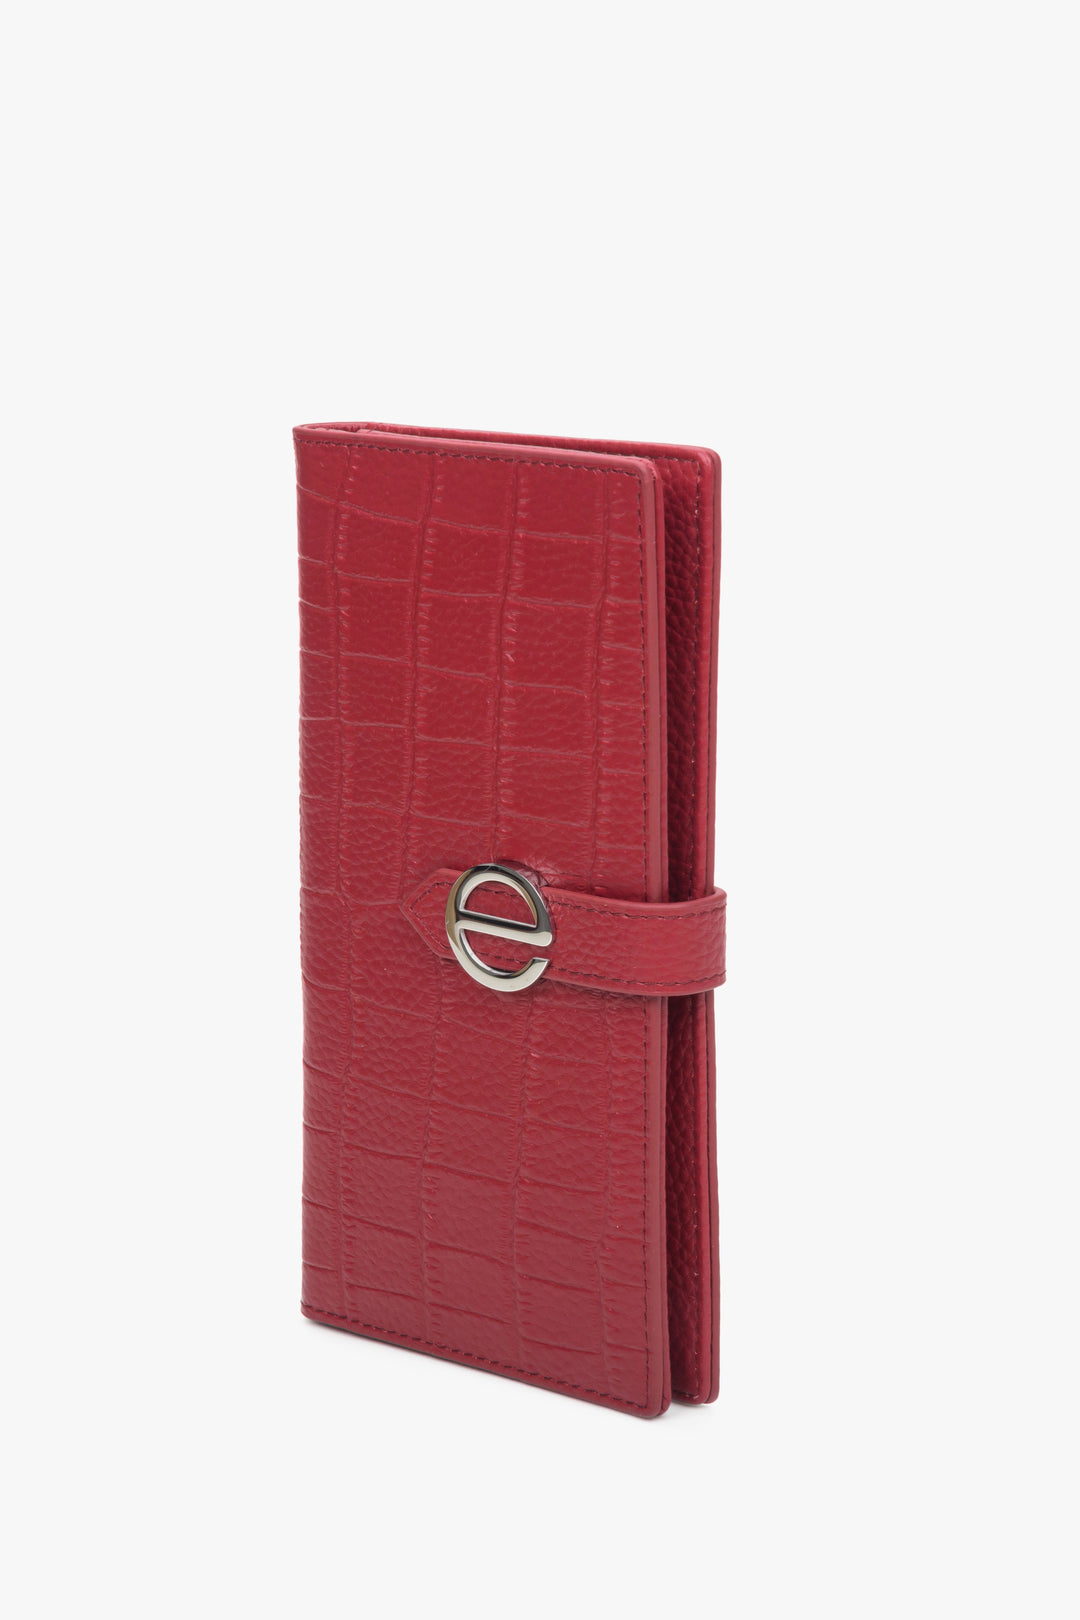 Red large women's wallet with silver fittings by Estro.